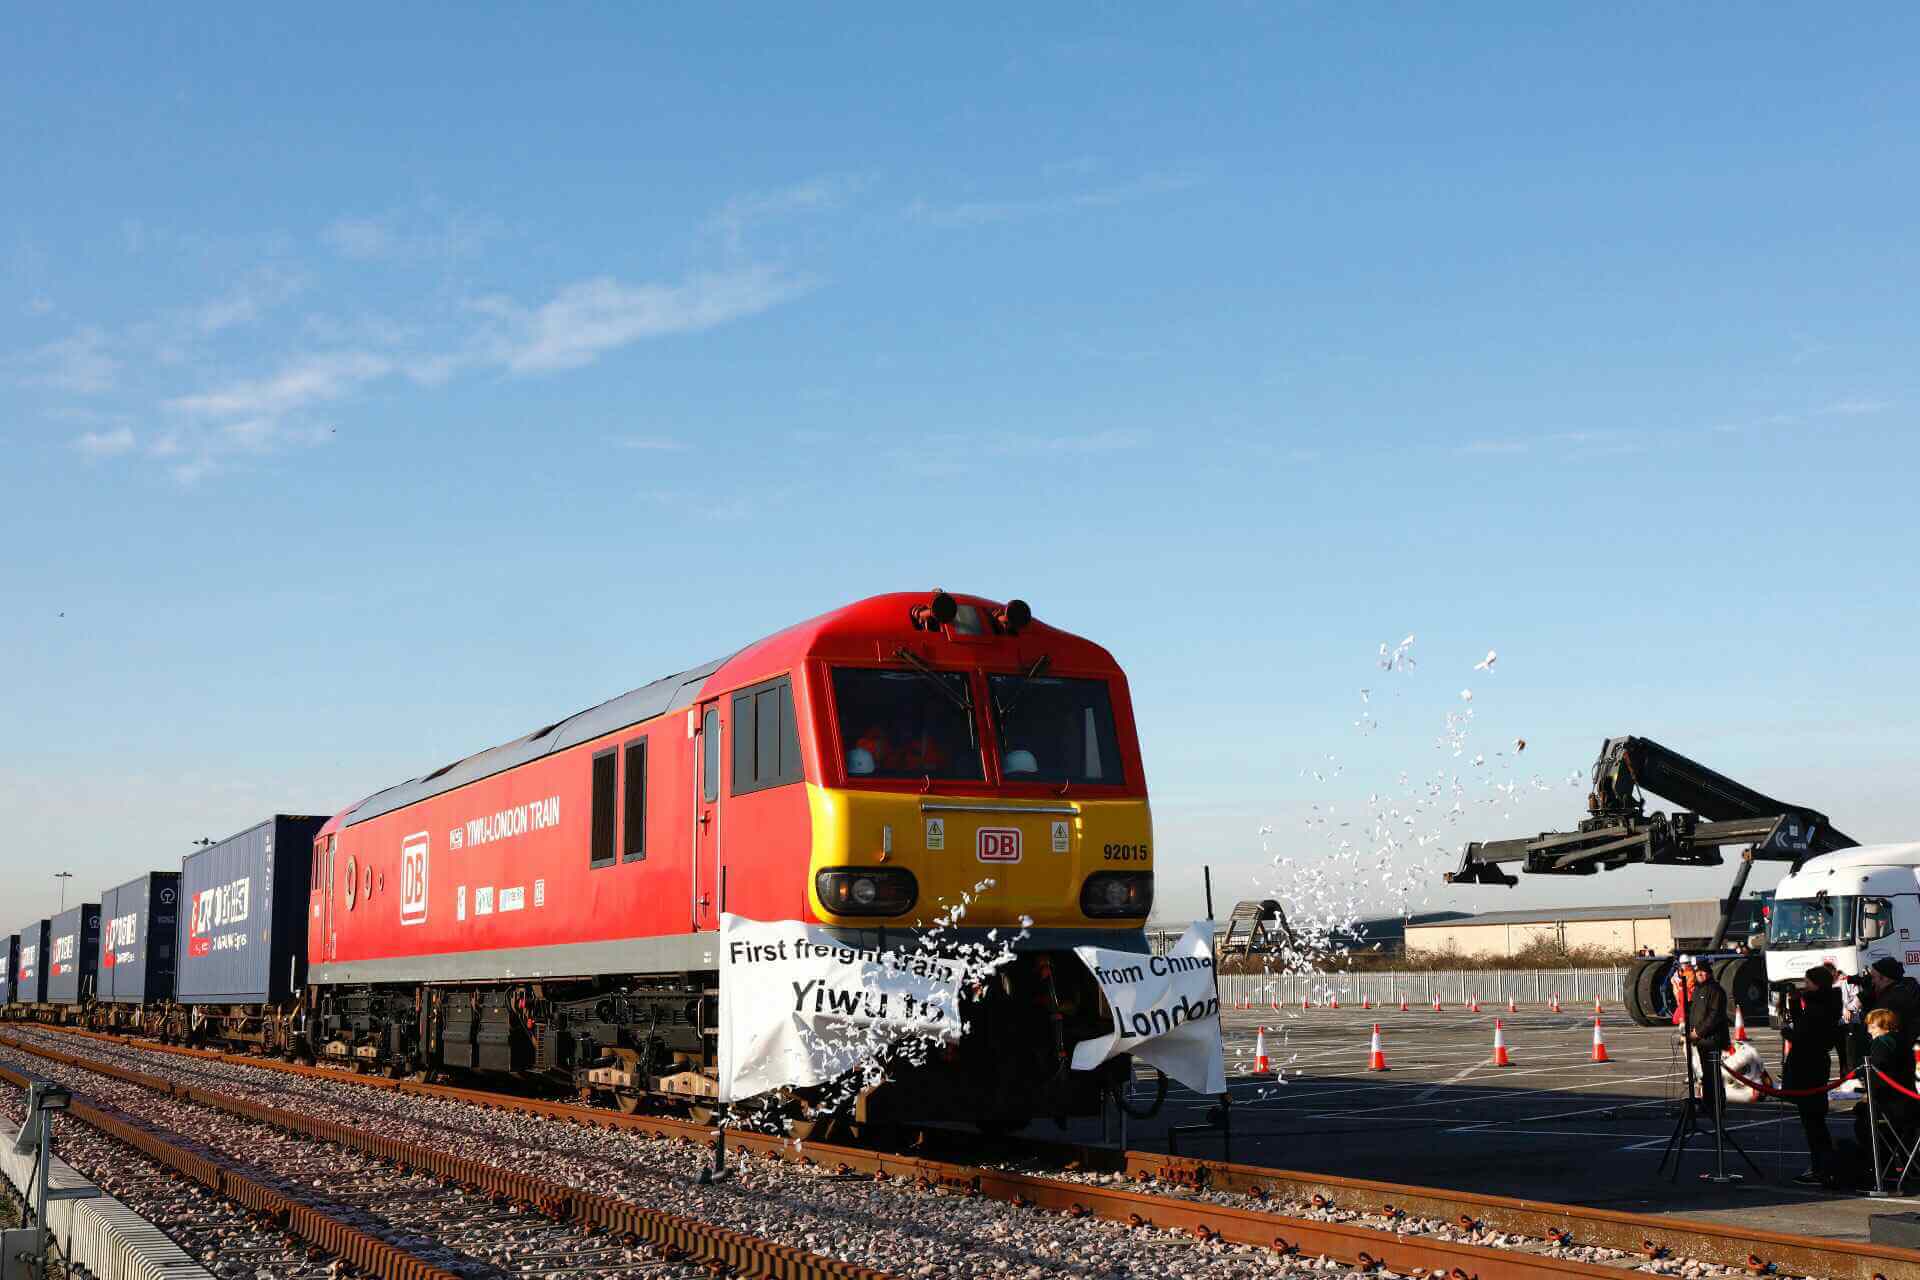 First Freight Train from China Arrives in London